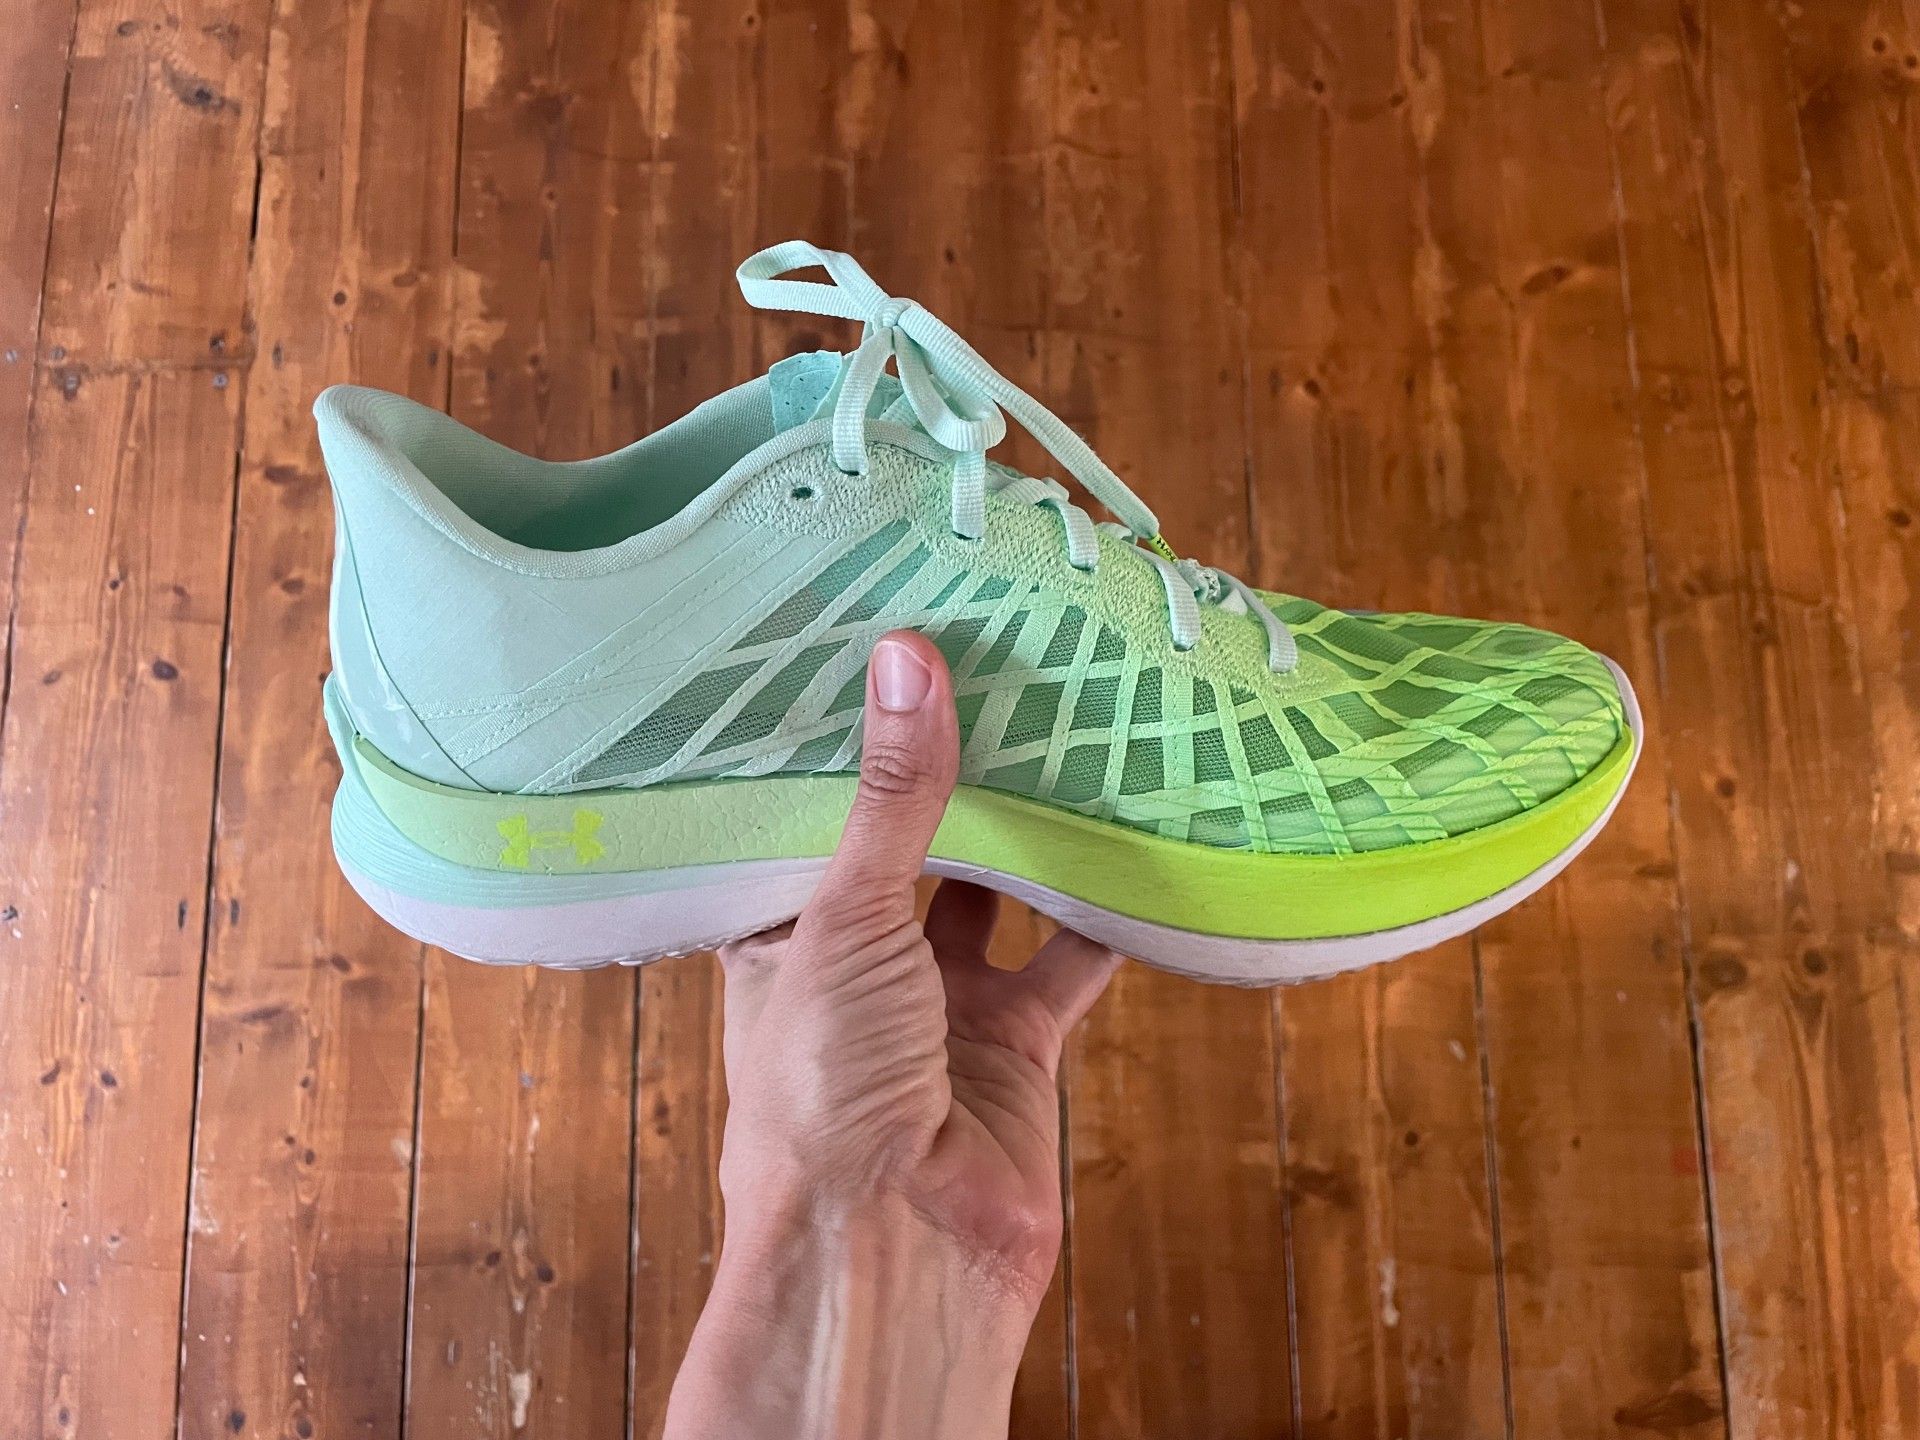 Under Armour Velociti Elite: Tried and Tested